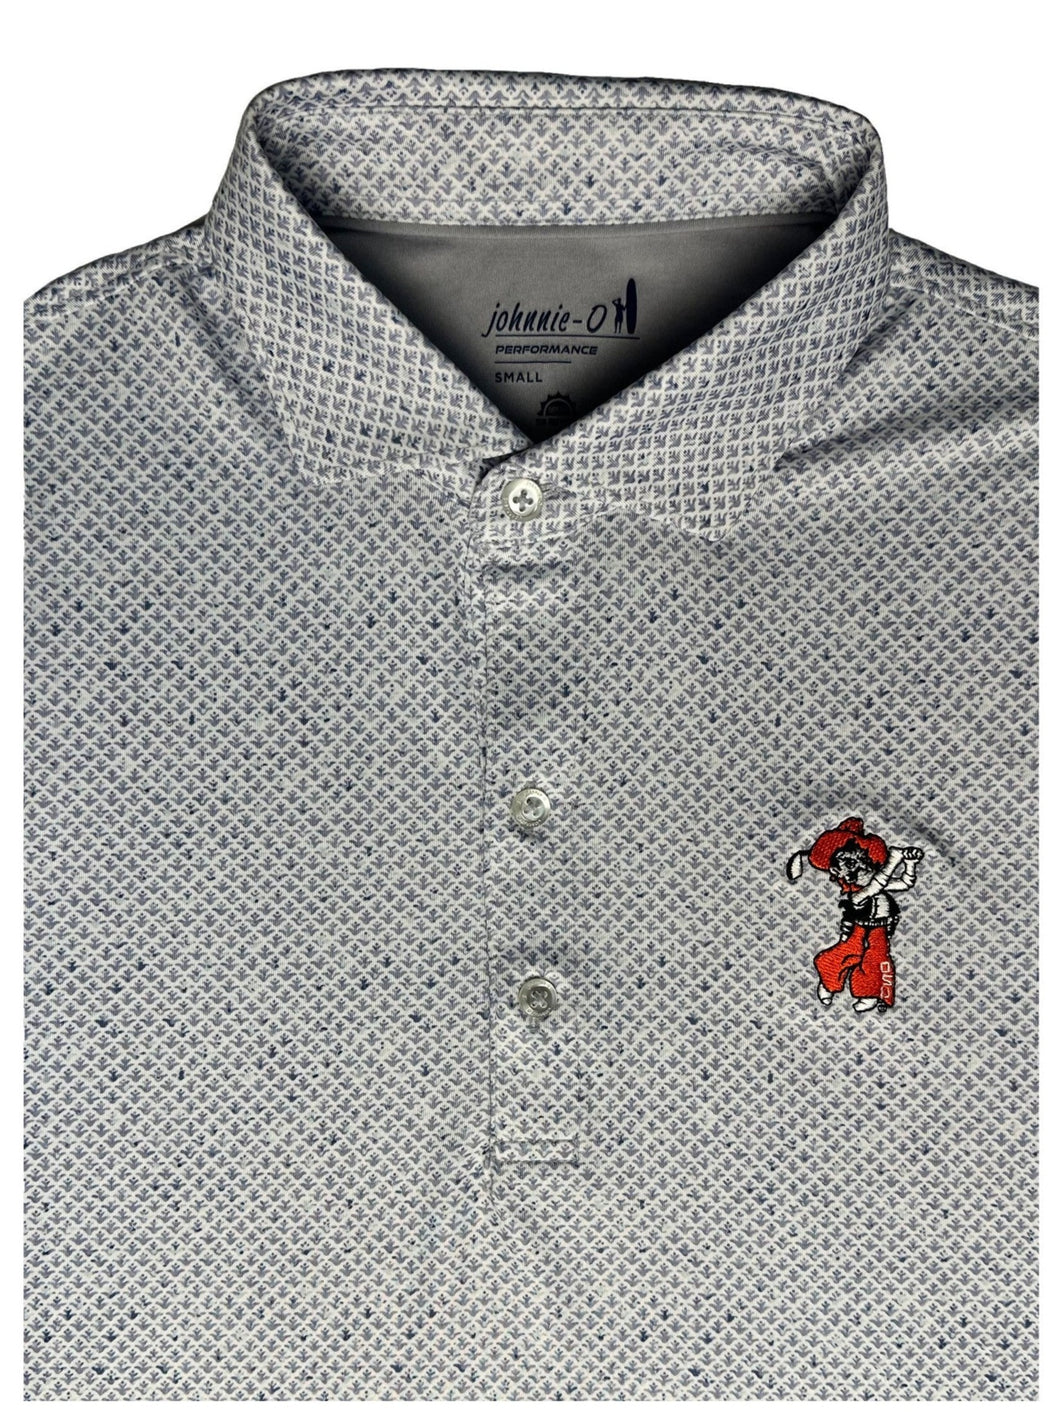 Johnnie-O Men's Howie Printed Jersey Performance Polo